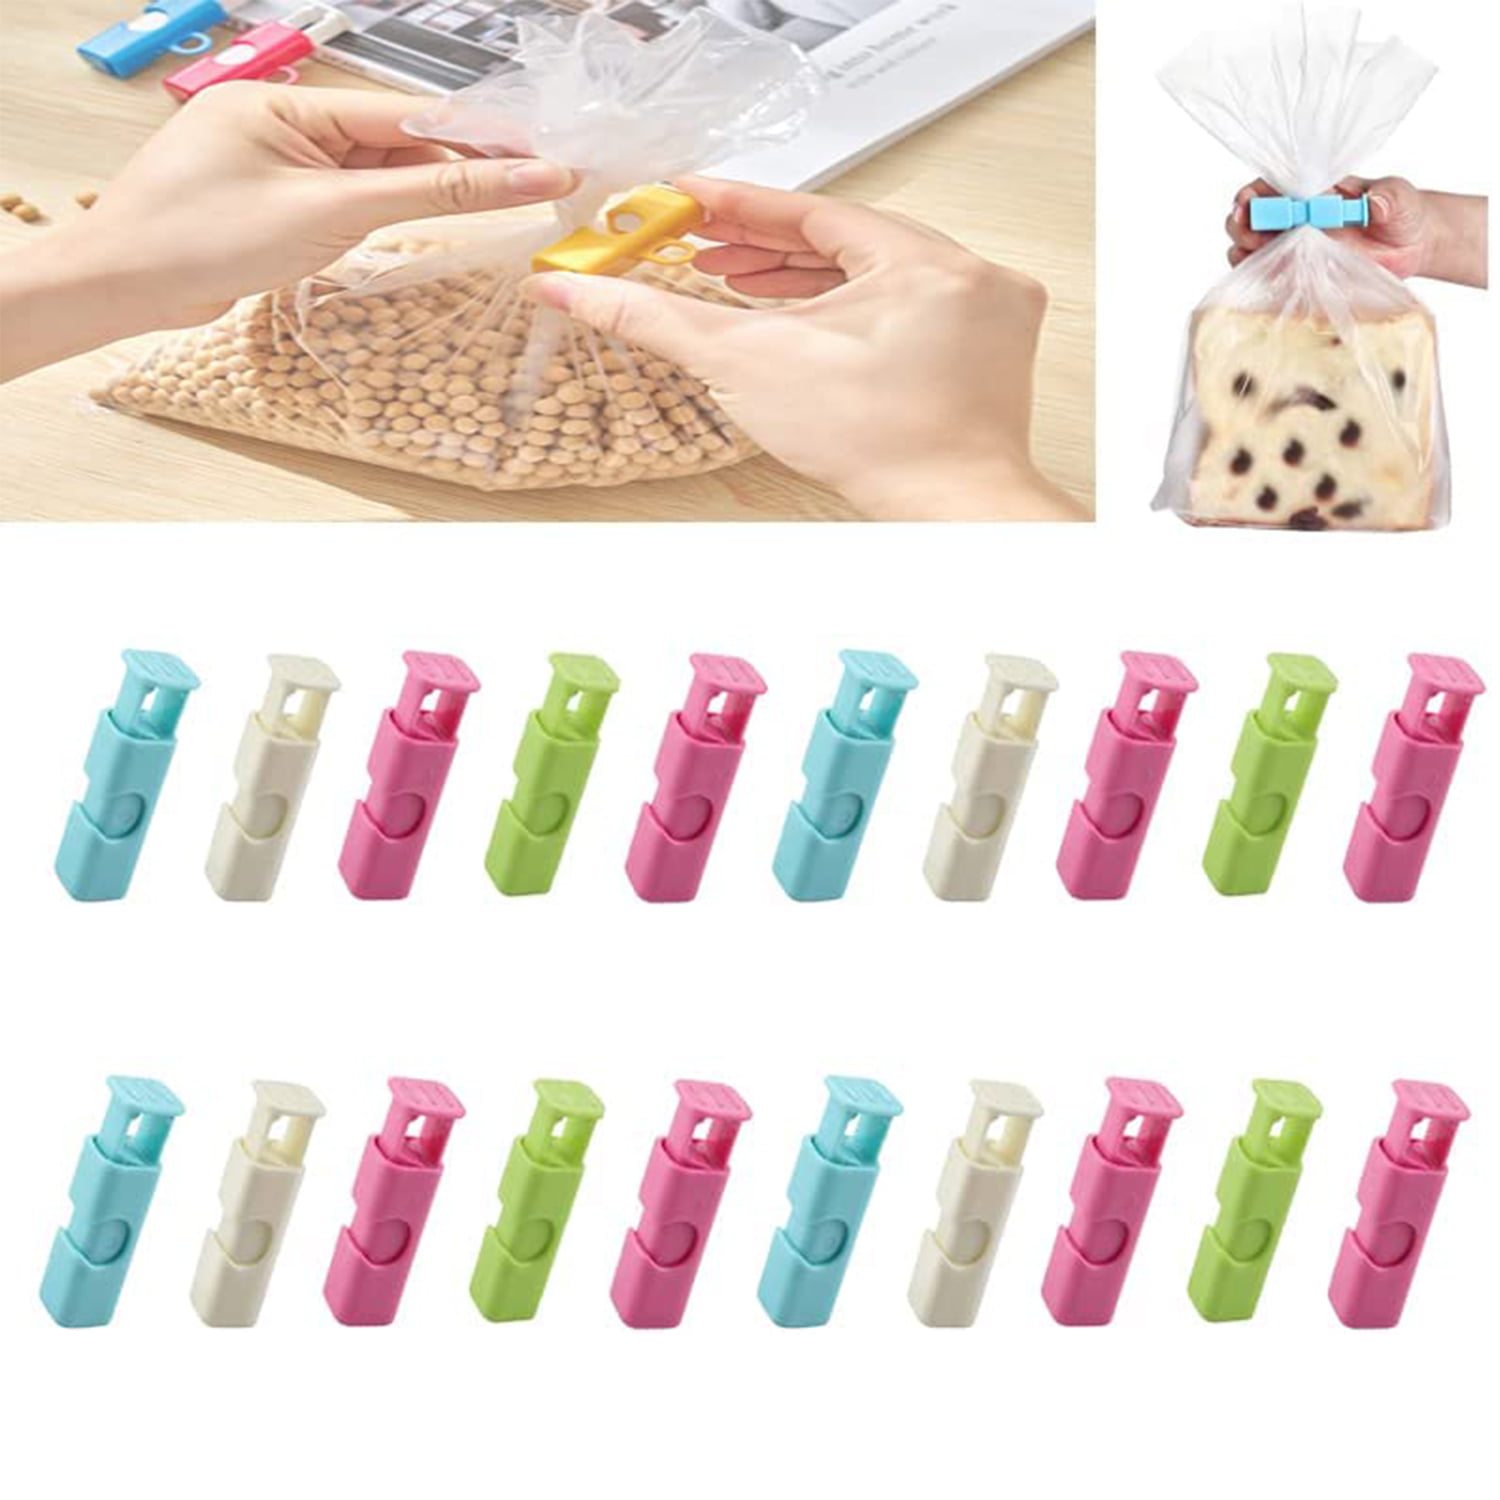  Mr. Pen- Bag Clips, 8 Pack, Squeeze and Lock Bread Bag Clips  for Food Storage, Food Clips for Bags, Bread Clips, Plastic Bag Clip, Bag  Closure Clips, Bread Clips Plastic, Bread